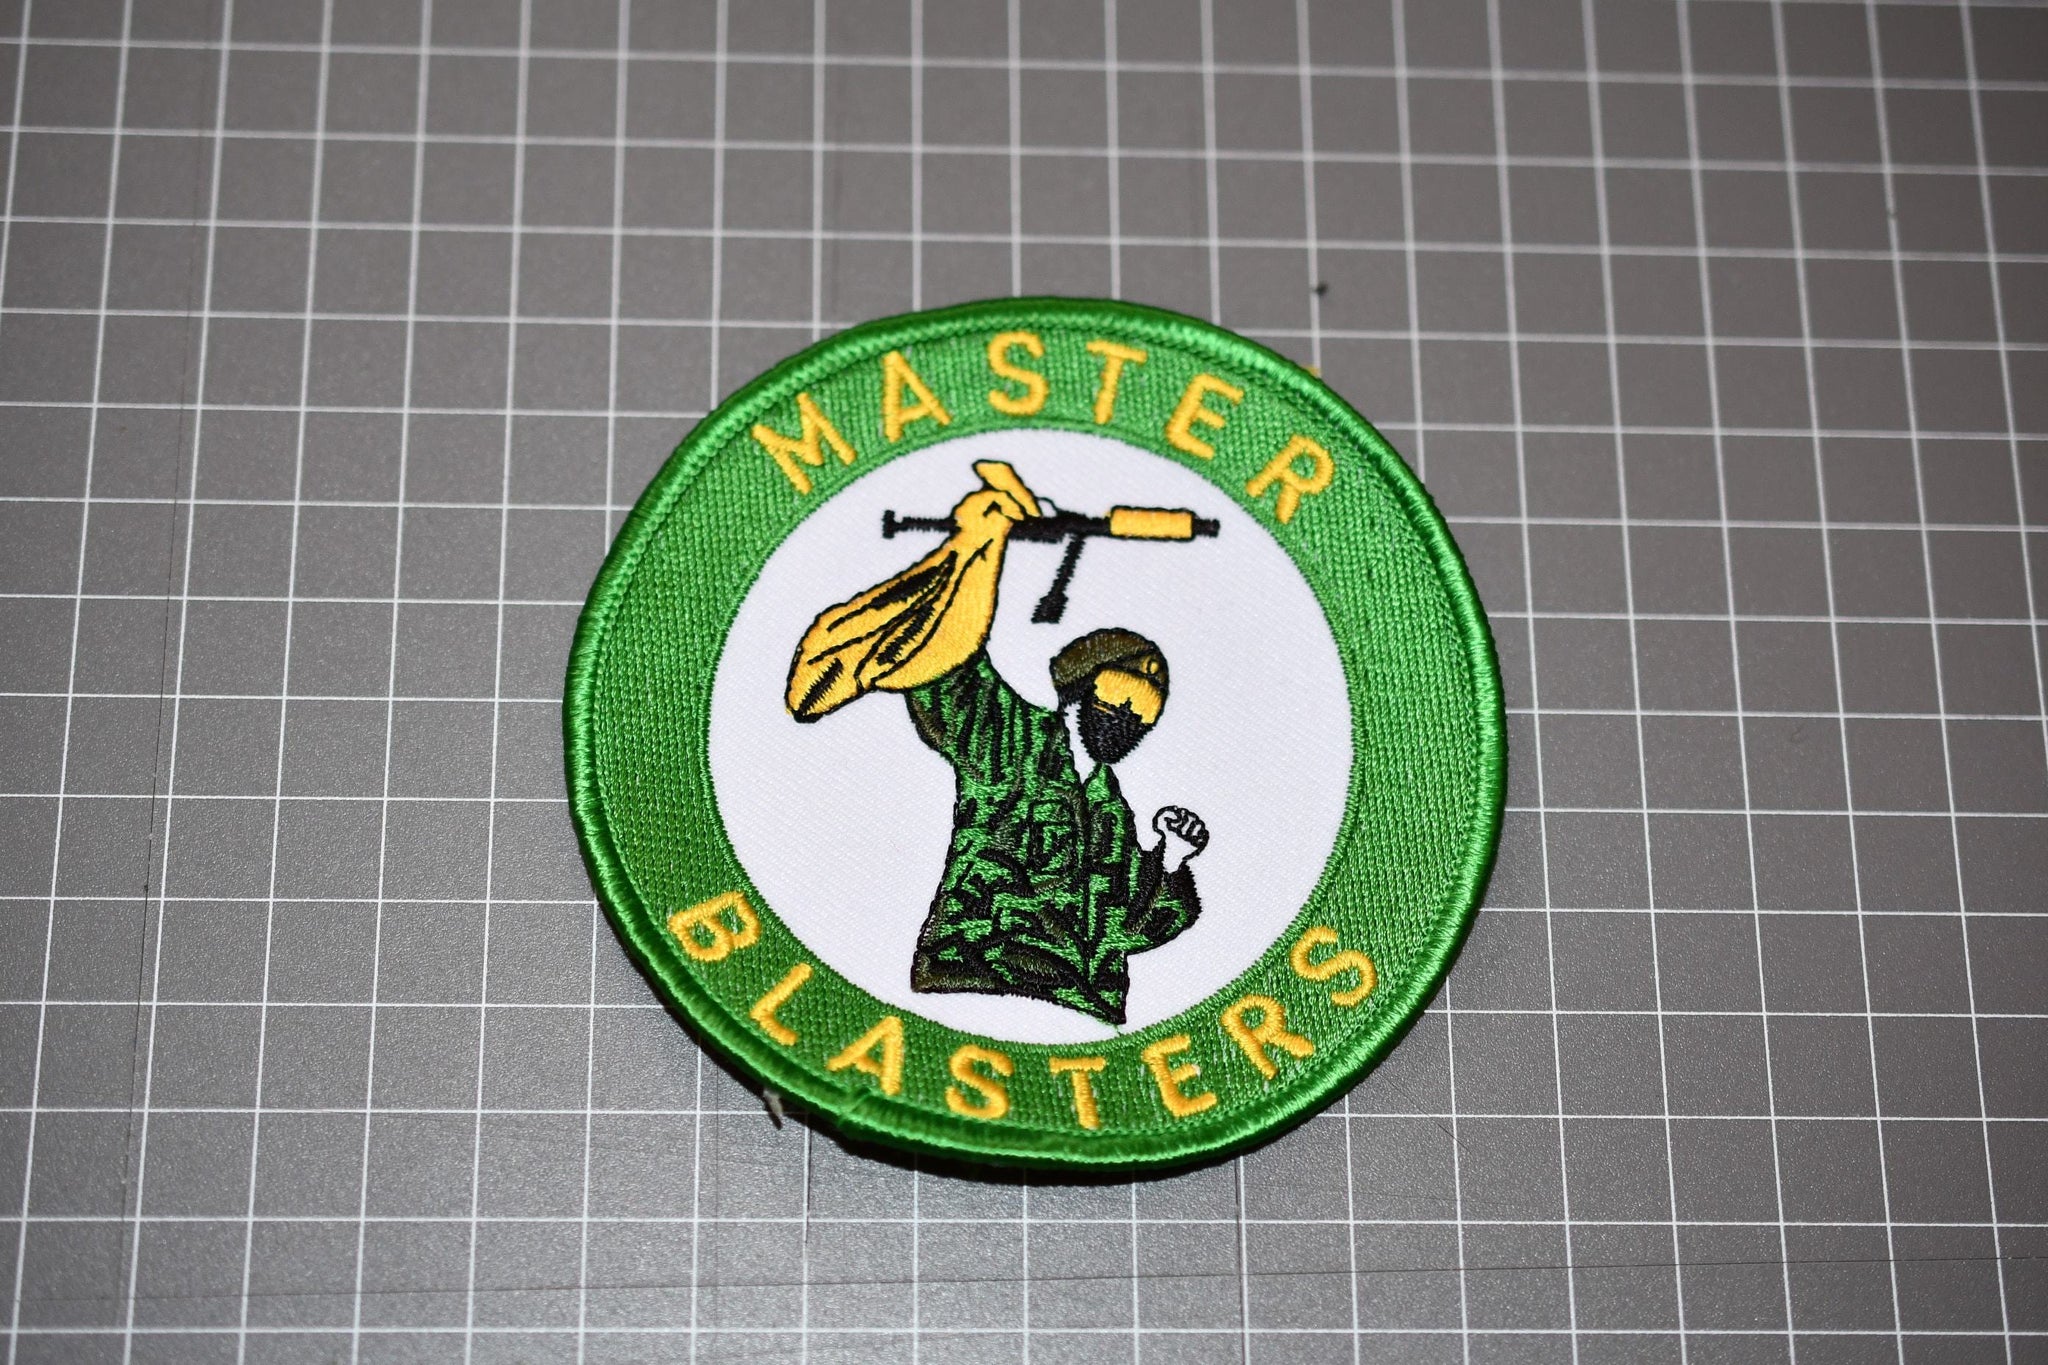 Master Blasters Airsoft Team Patch (B10-005)